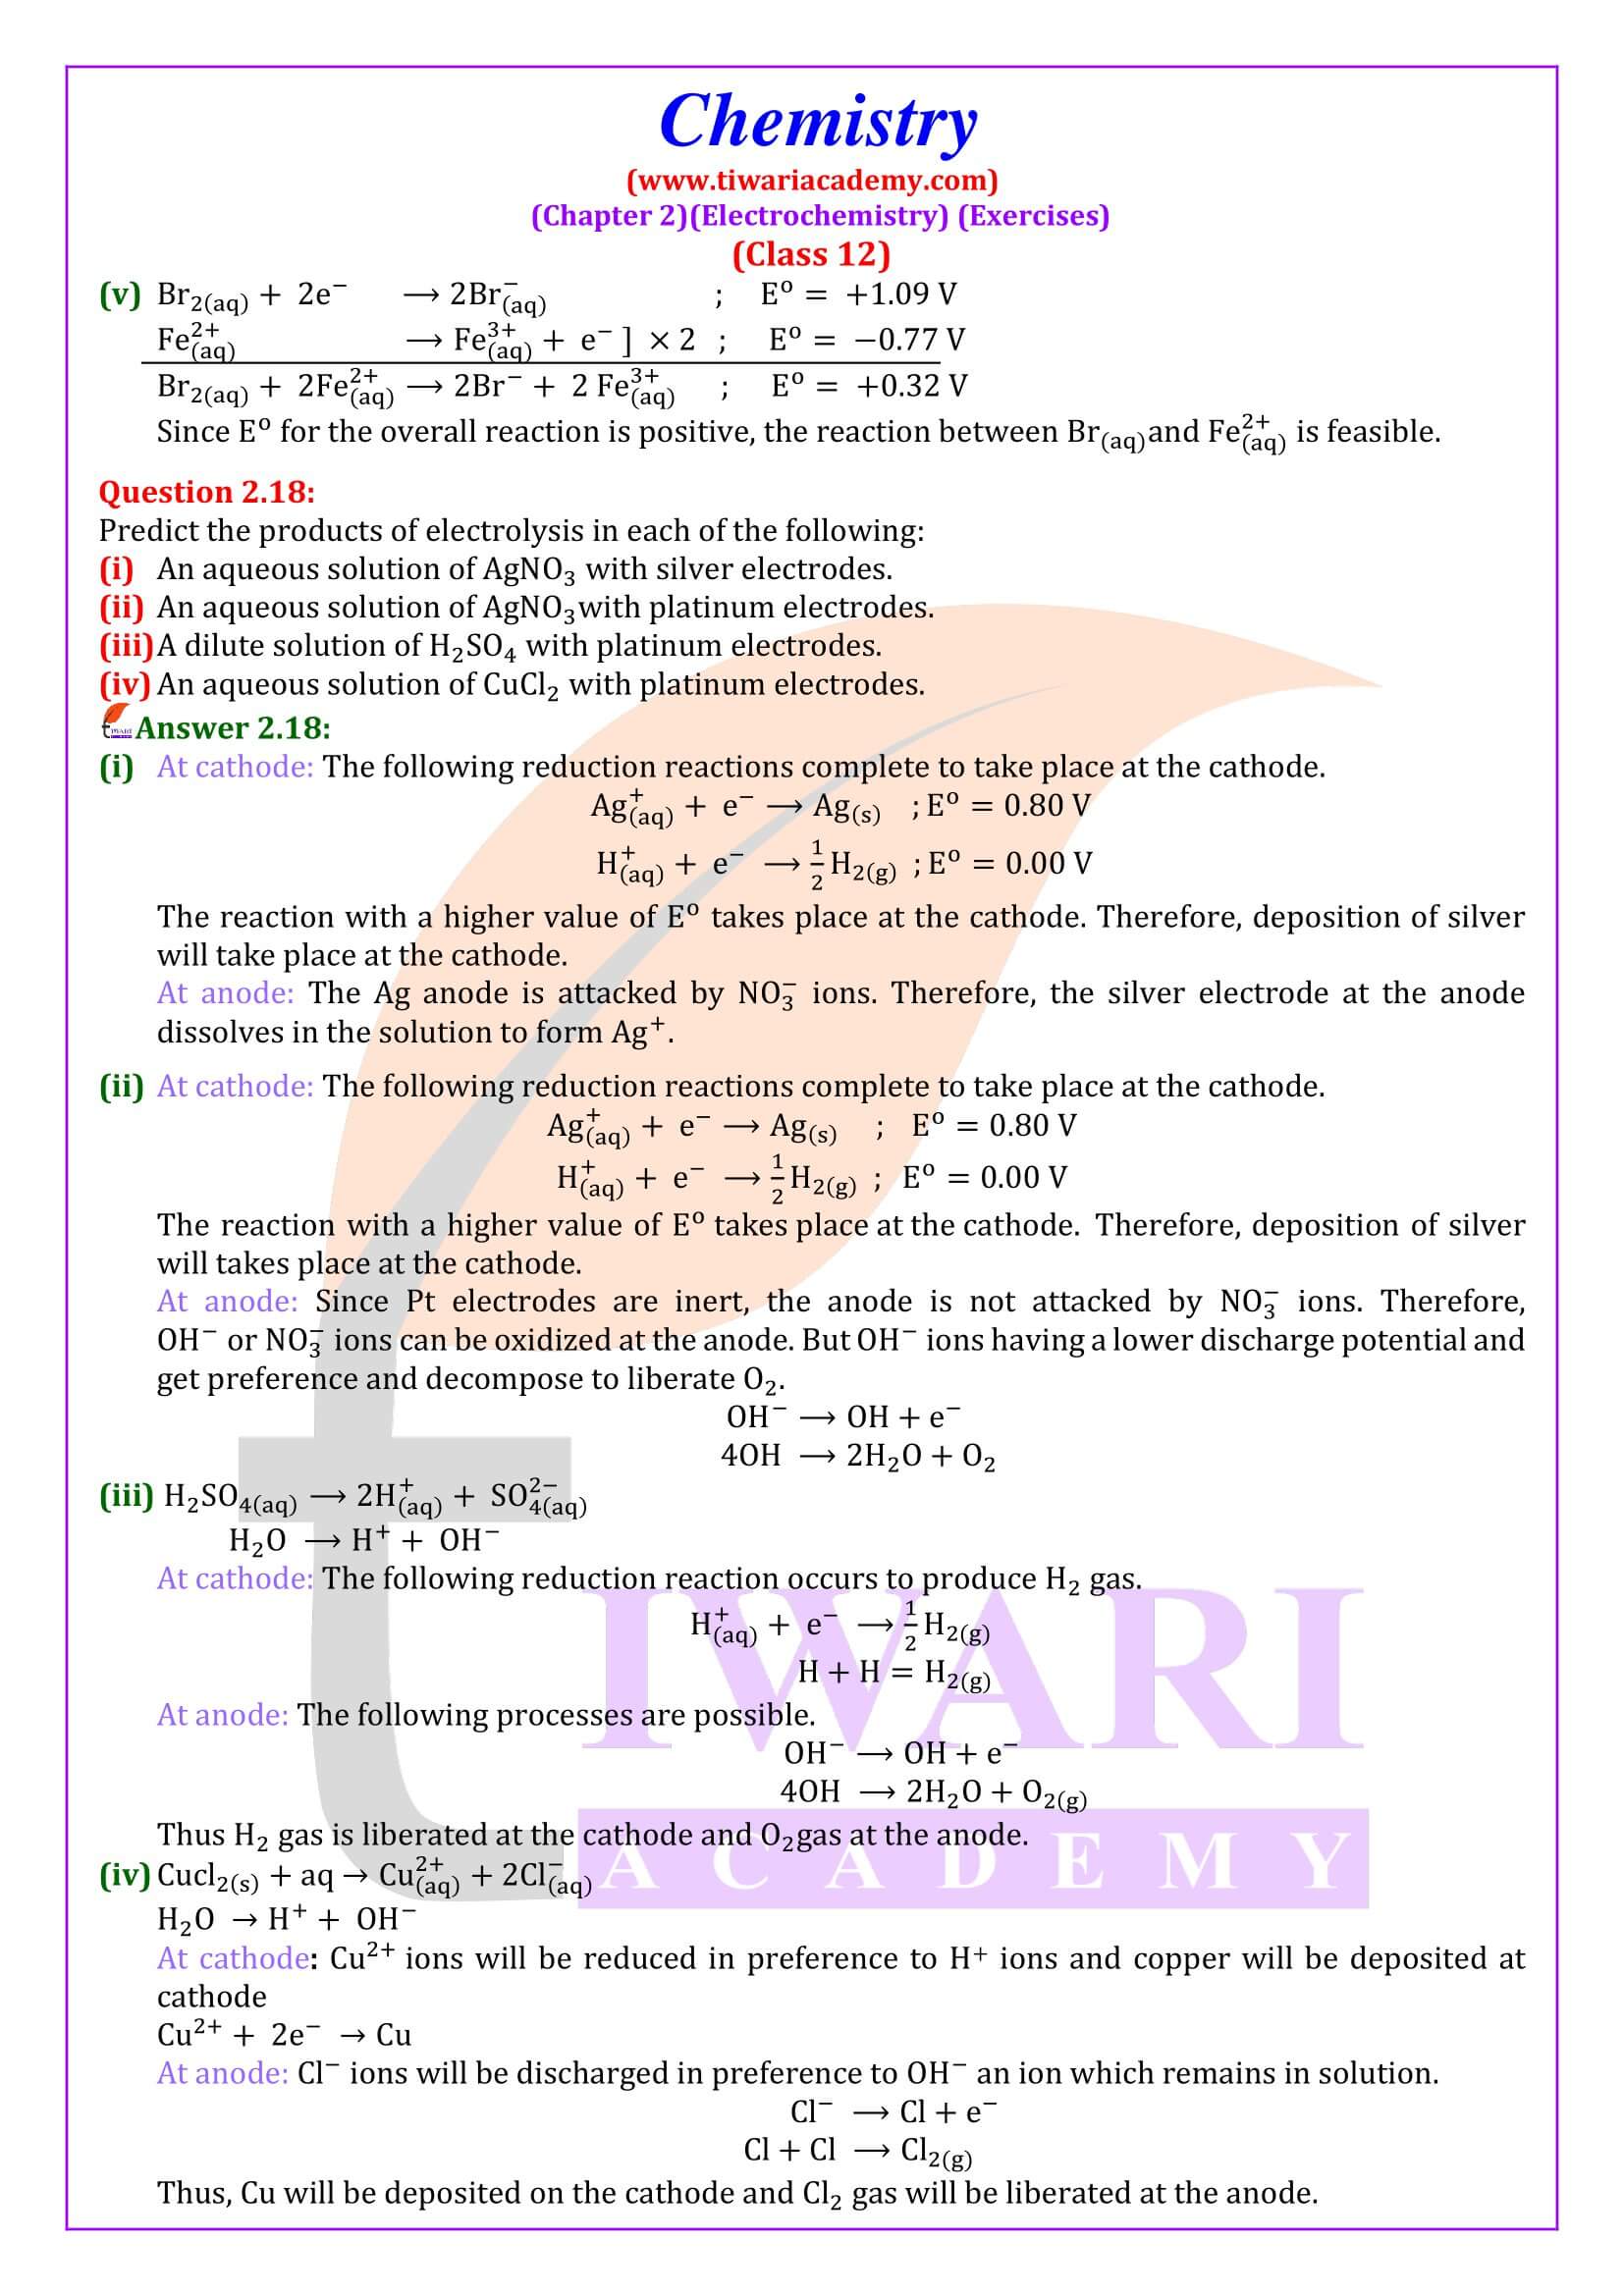 NCERT Solutions for Class 12 Chemistry Chapter 2 updated